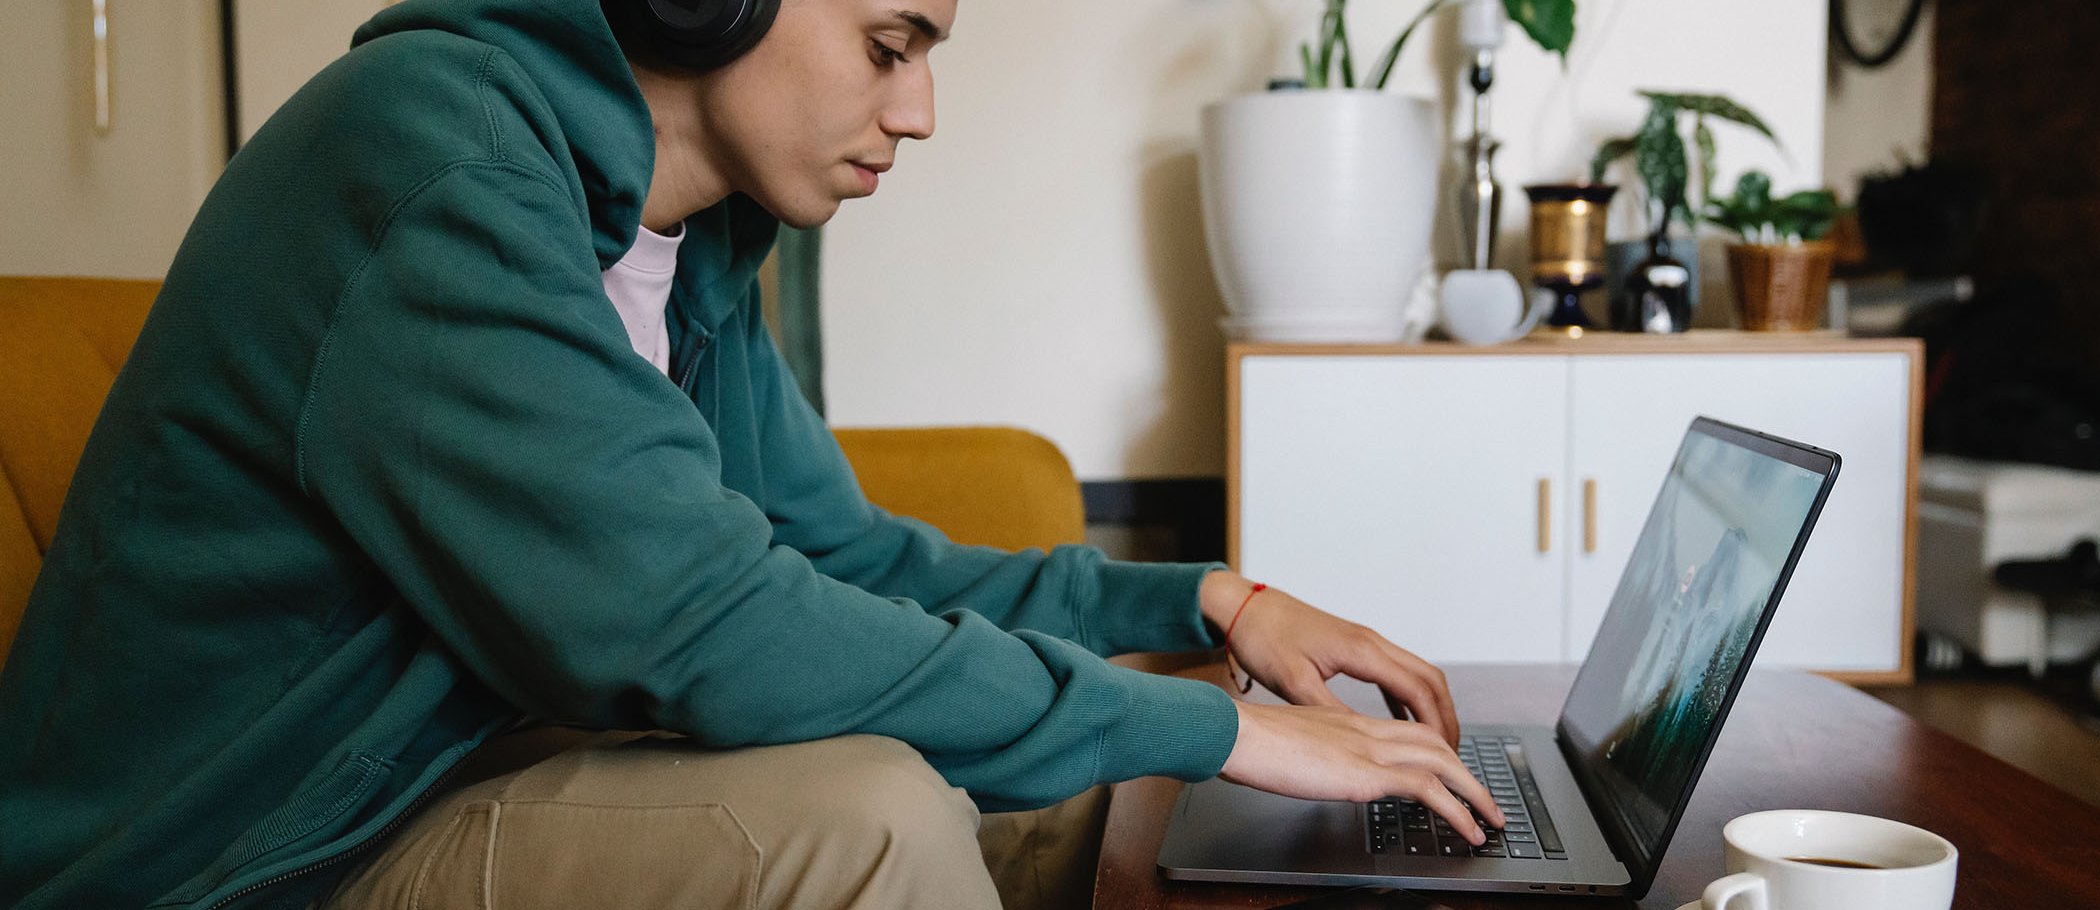 A young man with headphones using a laptop